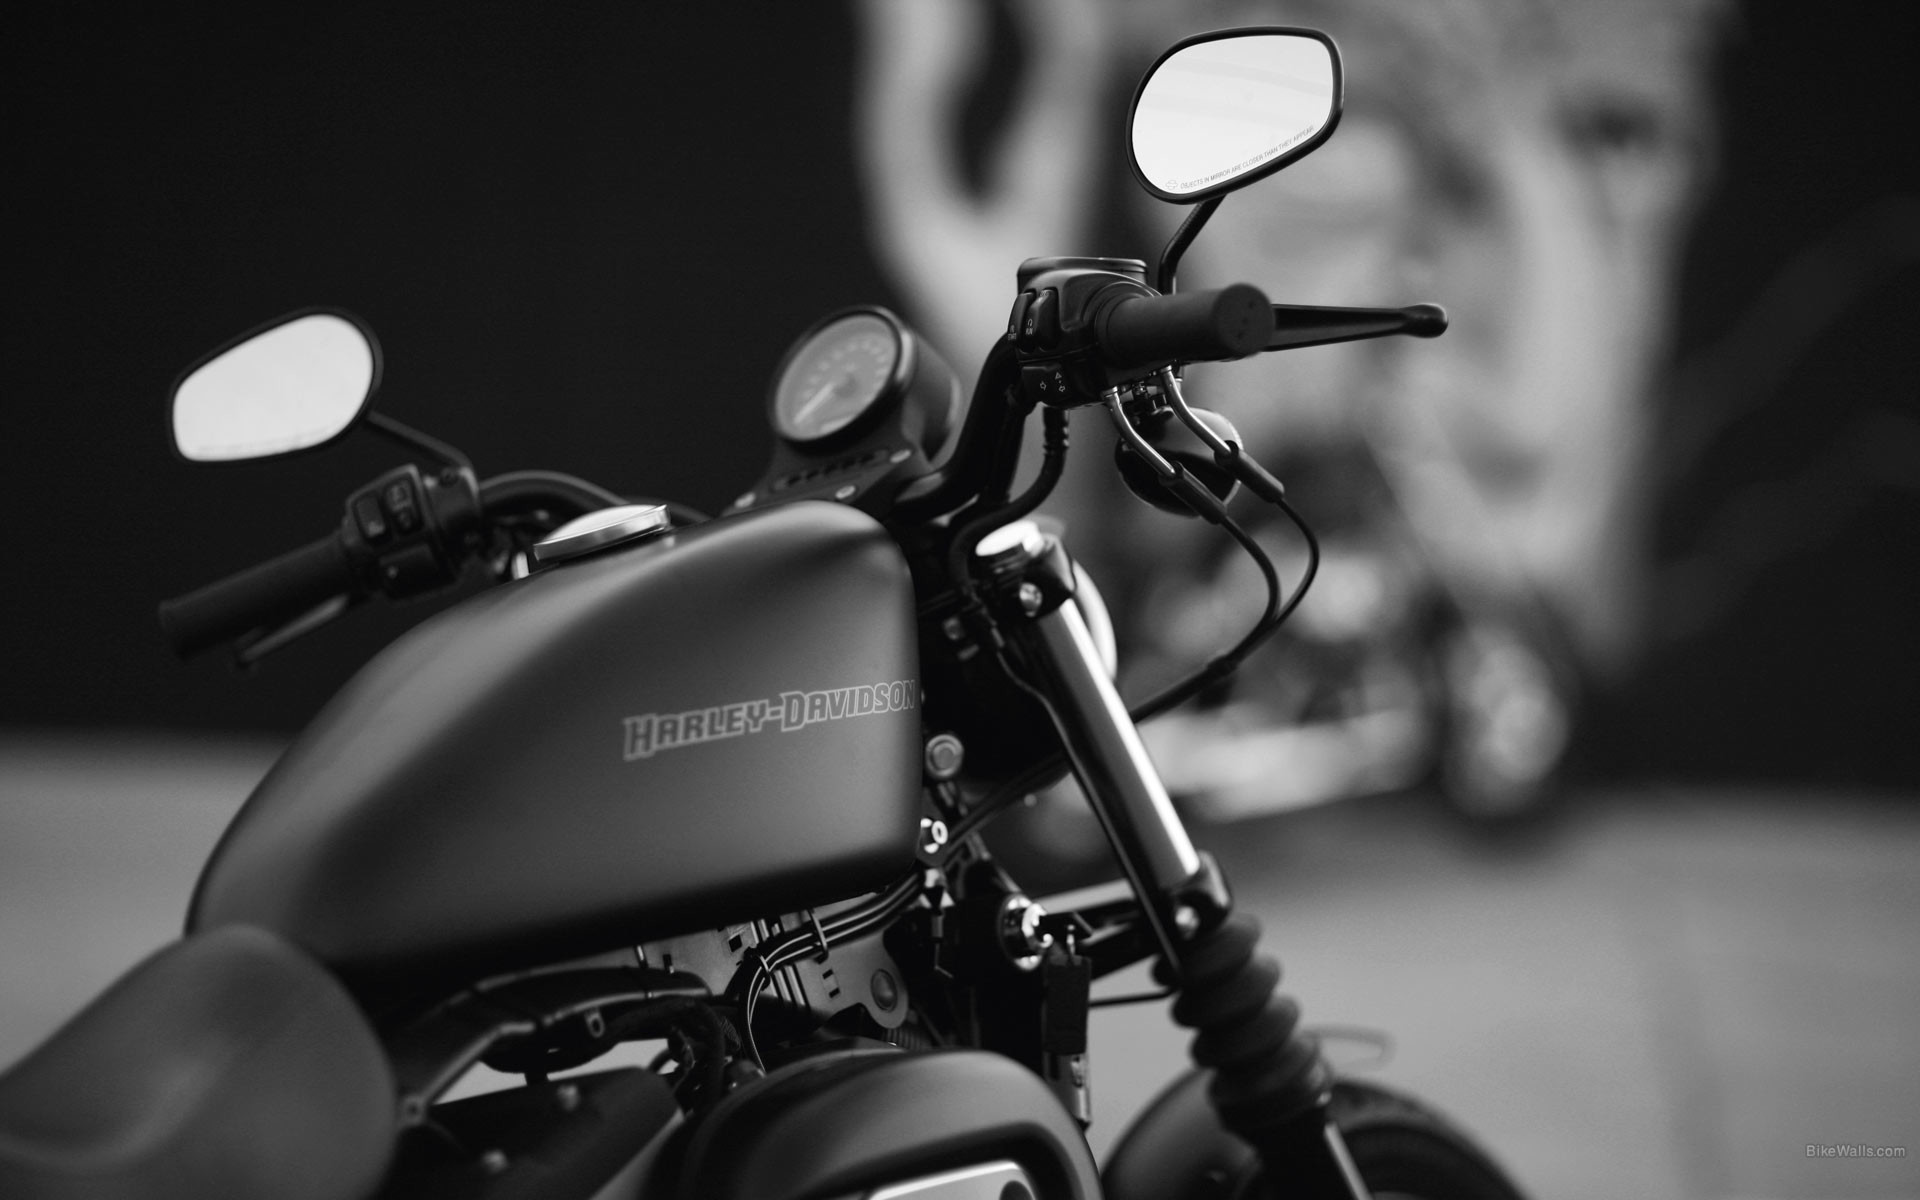 Case Study Harley S Exit From India What S The Future Like Passionate In Marketing